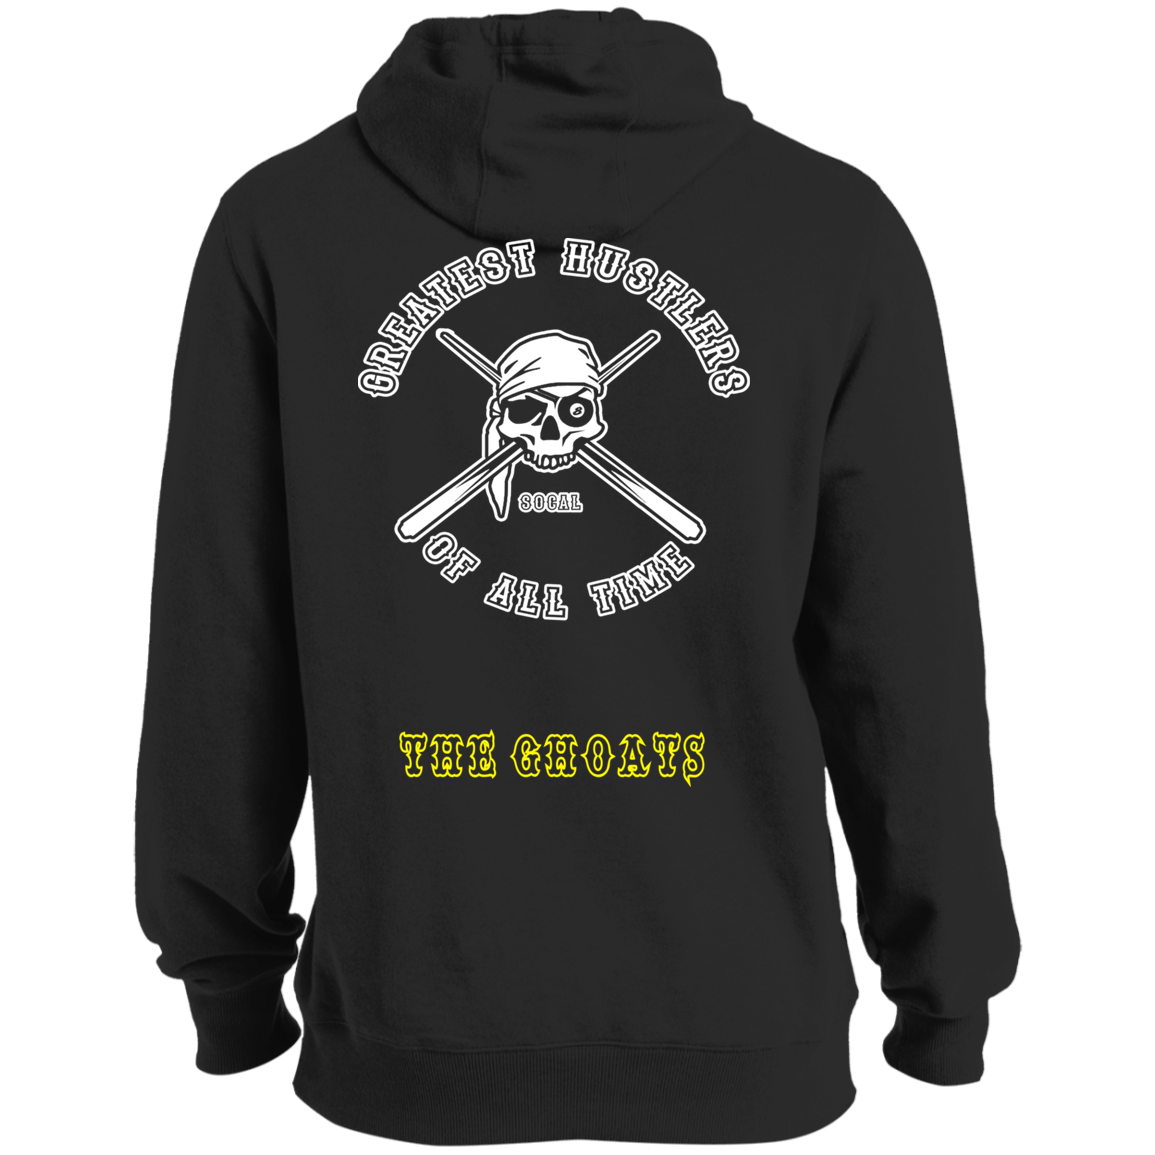 The GHOATS Custom Design. #4 Motorcycle Club Style. Ver 1/2. Ultra Soft Pullover Hoodie